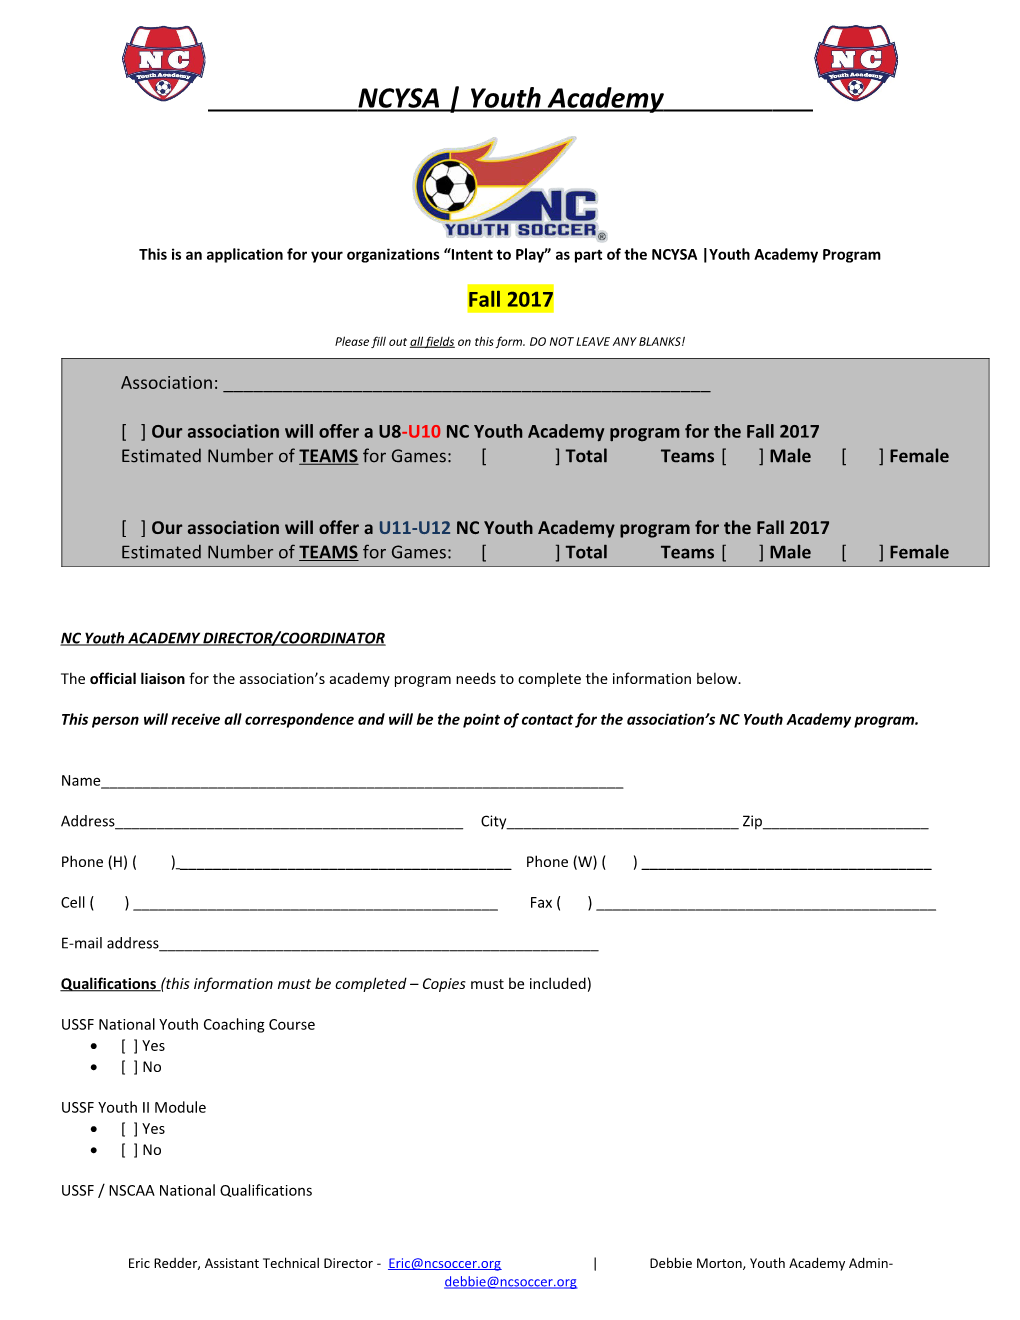 NCYSA Classic Team Registration - Intent to Play Form